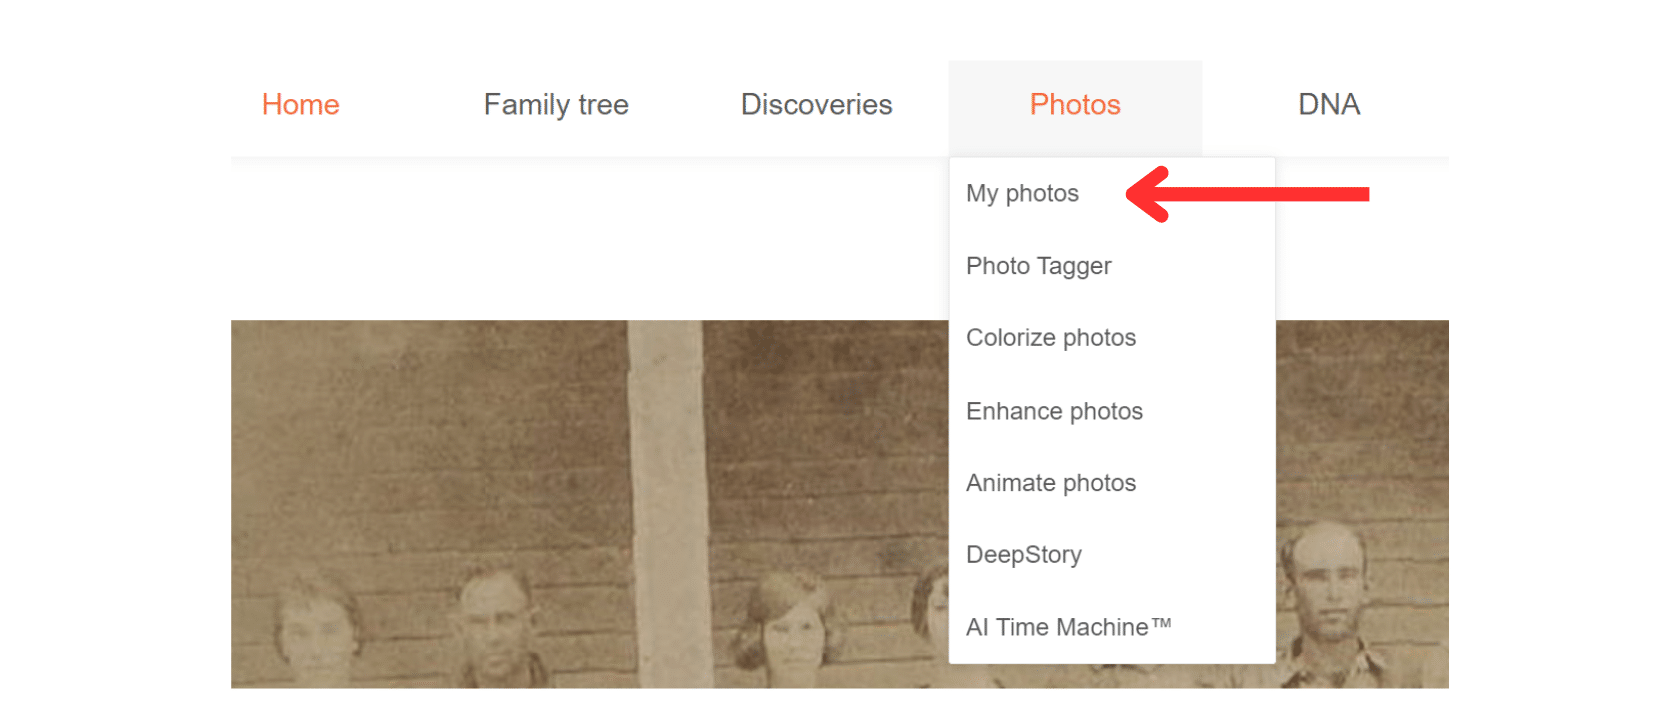 My photos dropdown in MyHeritage